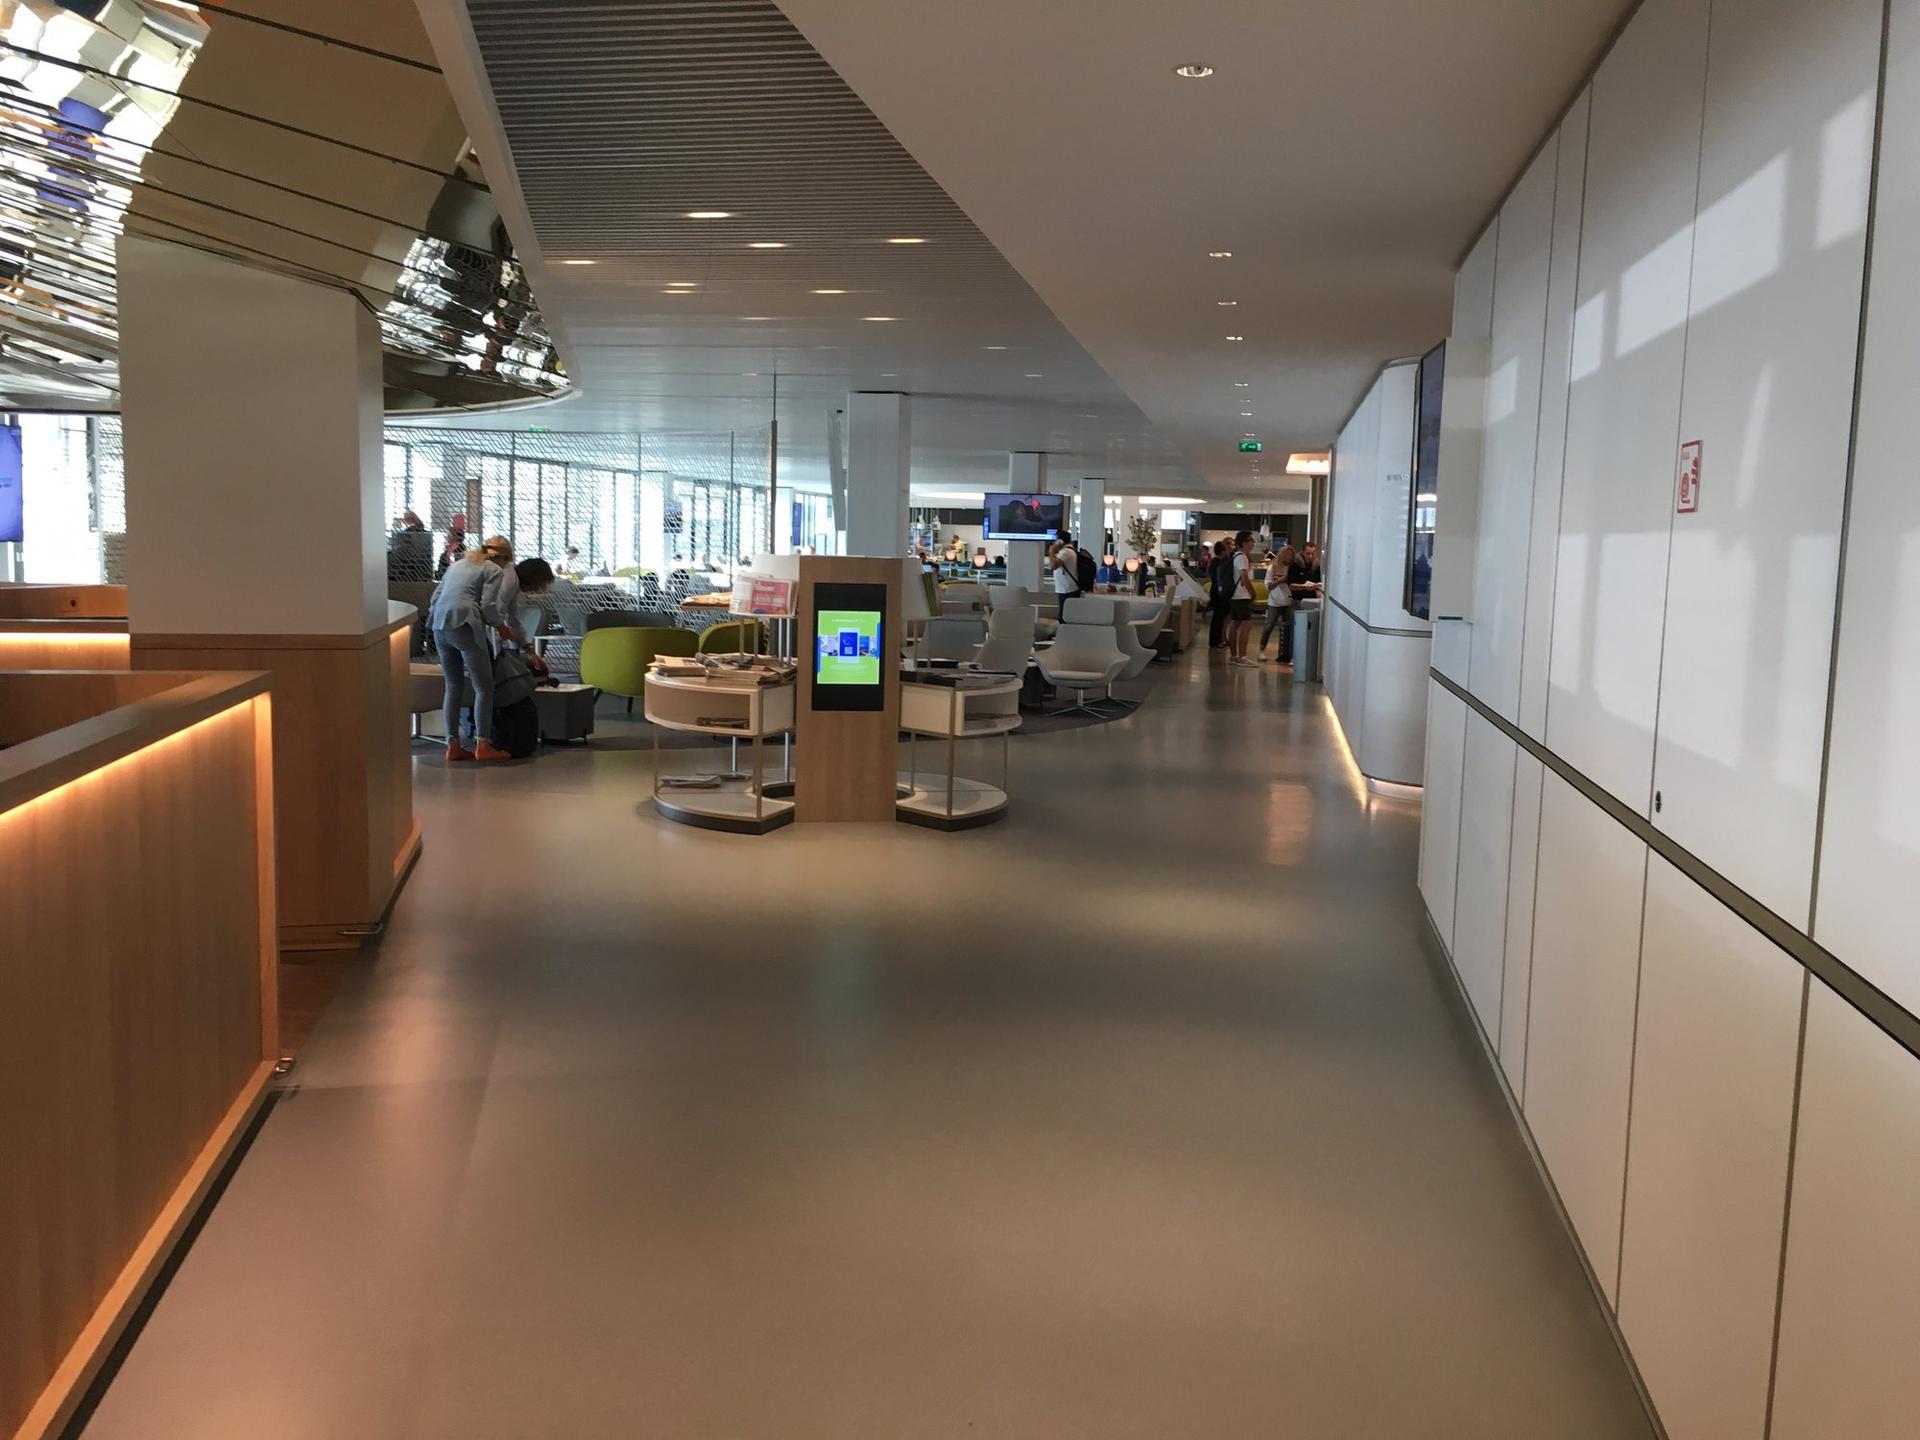 Air France Lounge (Concourse L) image 13 of 57